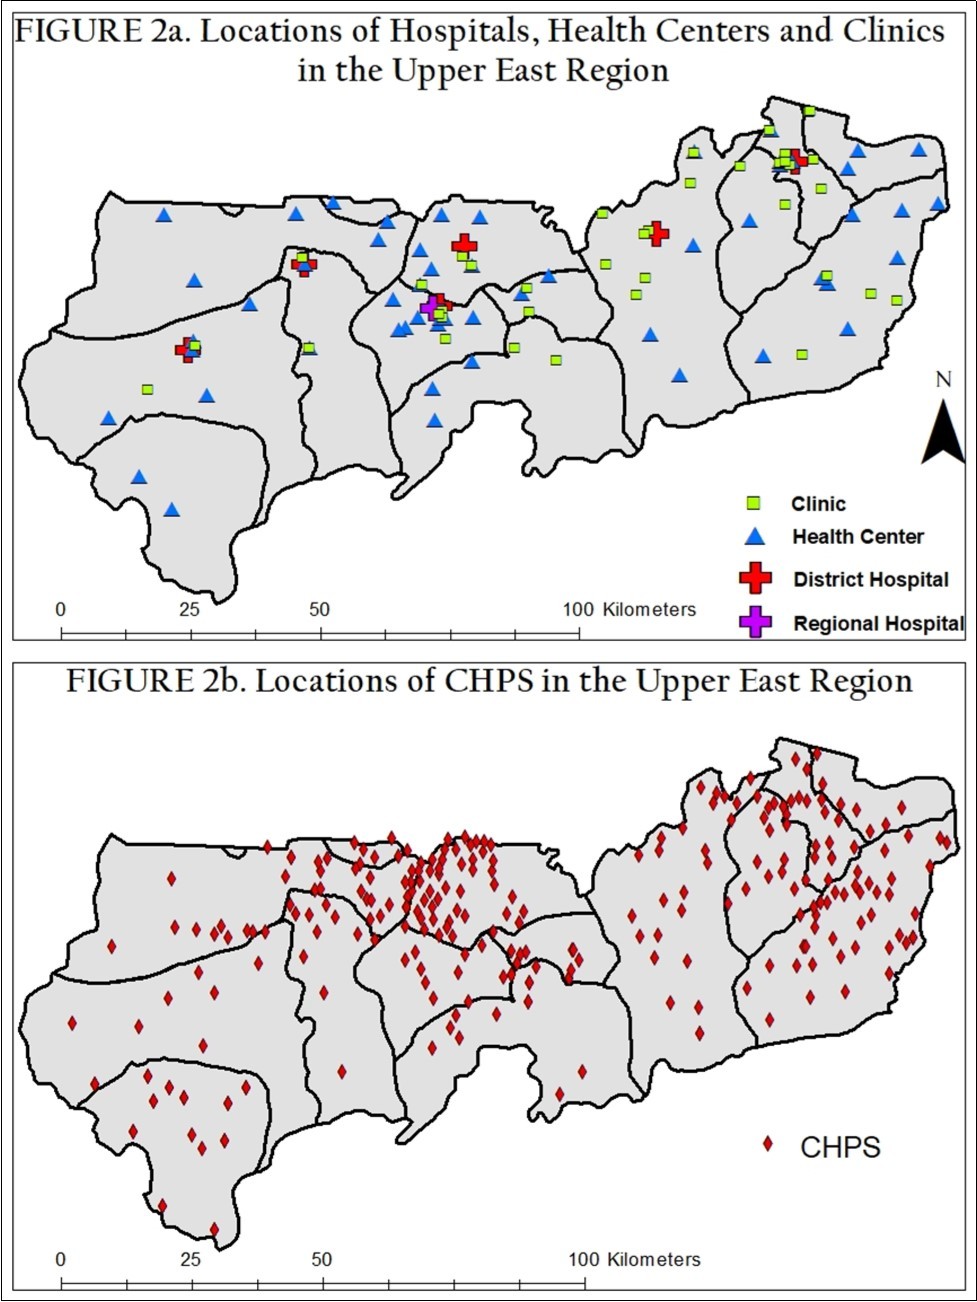  A) Locations of Hospitals, Health centers and clinics in the Upper East Region. B) Locations of CHPS in the Upper East Region